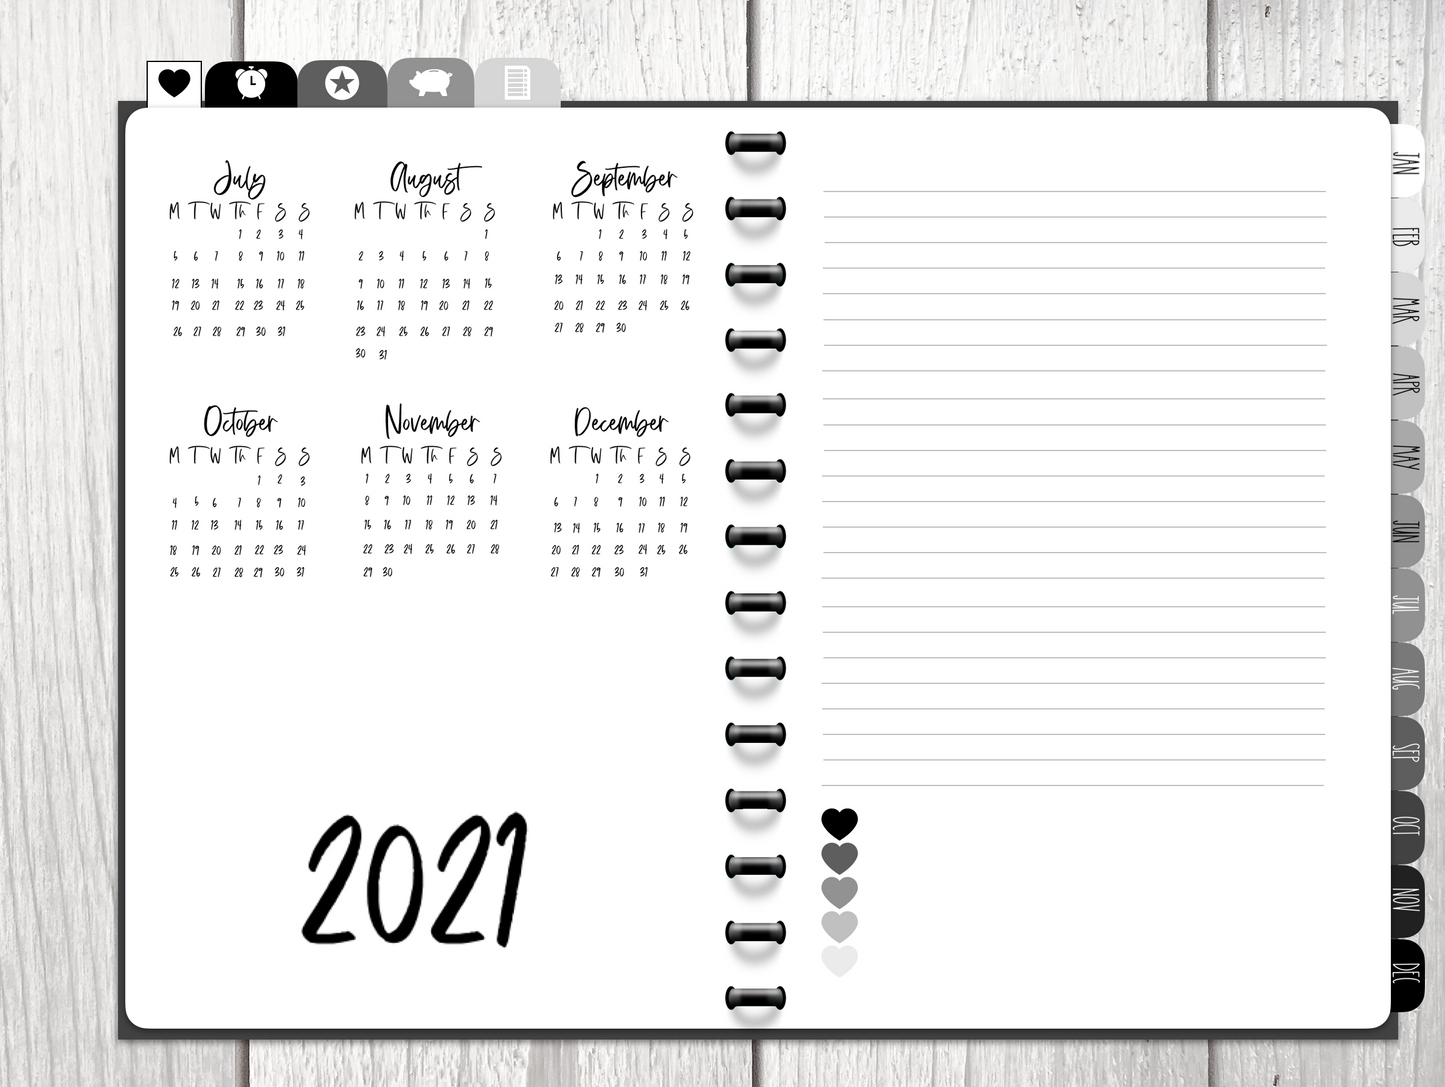 Happy Heart Shades of Gray Digital Planner- dated August 2021- July 2022